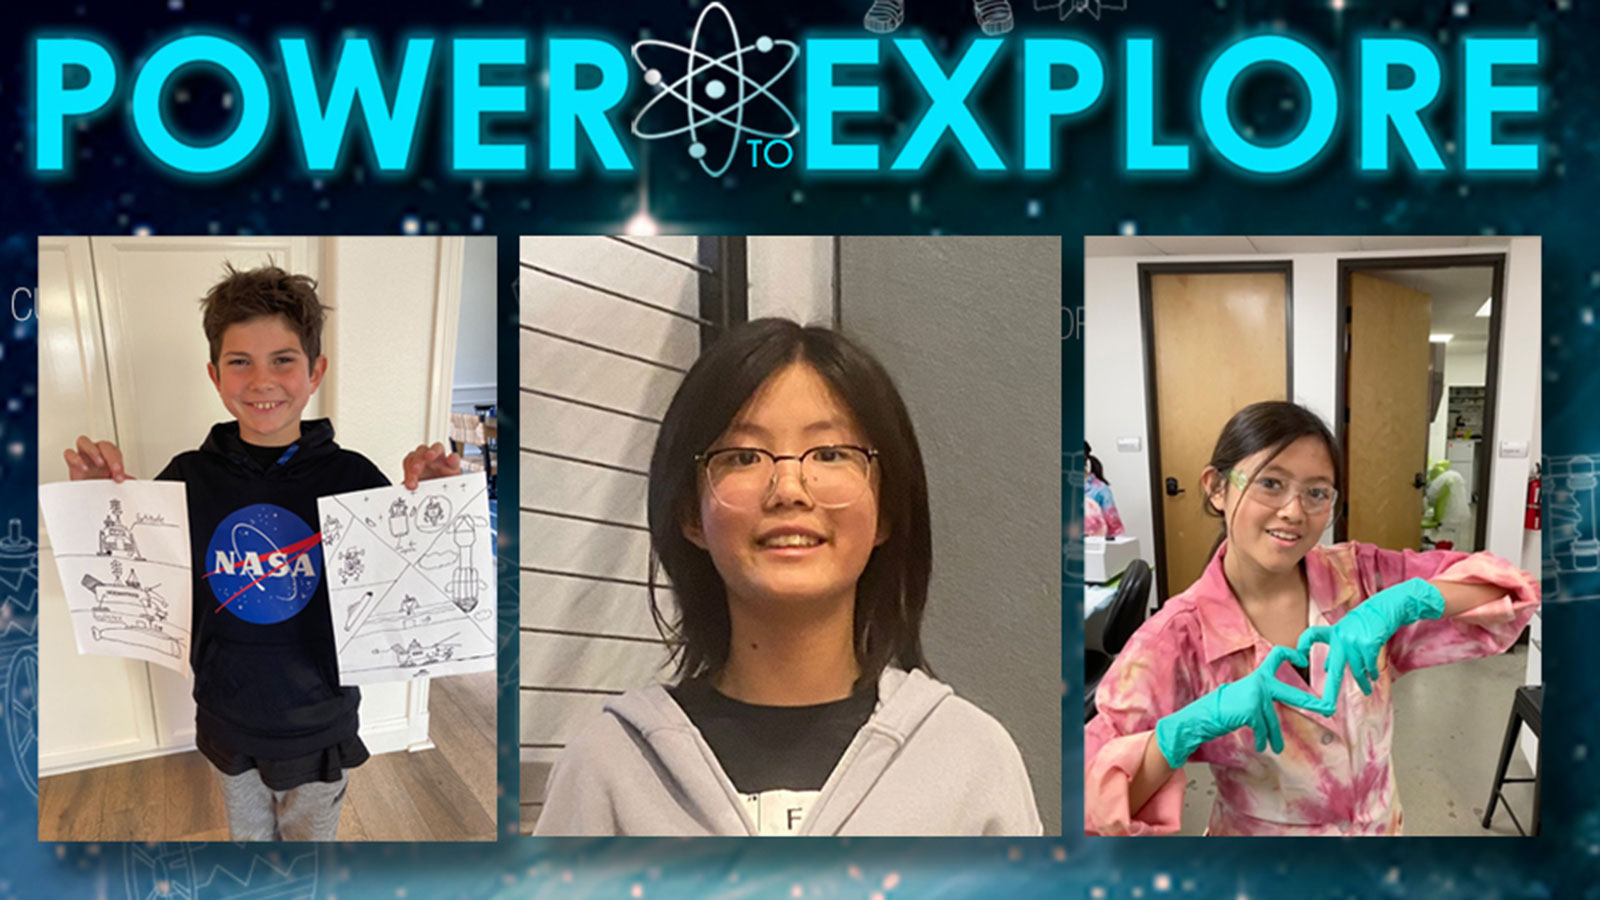 Power to Explore 2022-23 Student Writing Contest winners